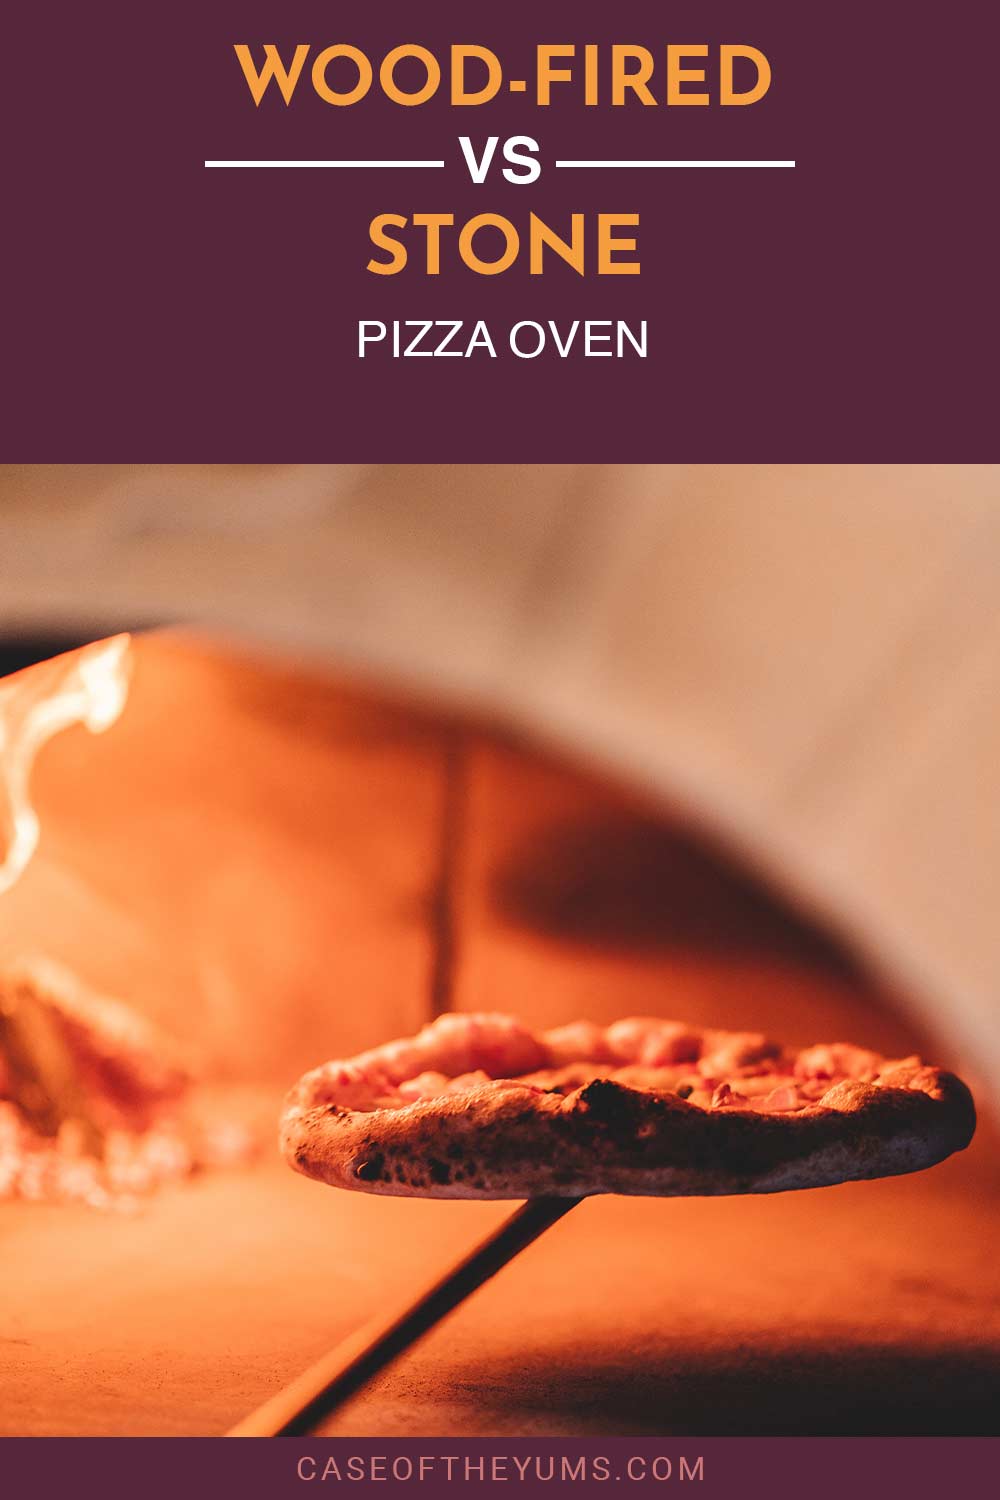 A pizza being taken out of an oven - Wood Fired vs. Stone Pizza Oven.